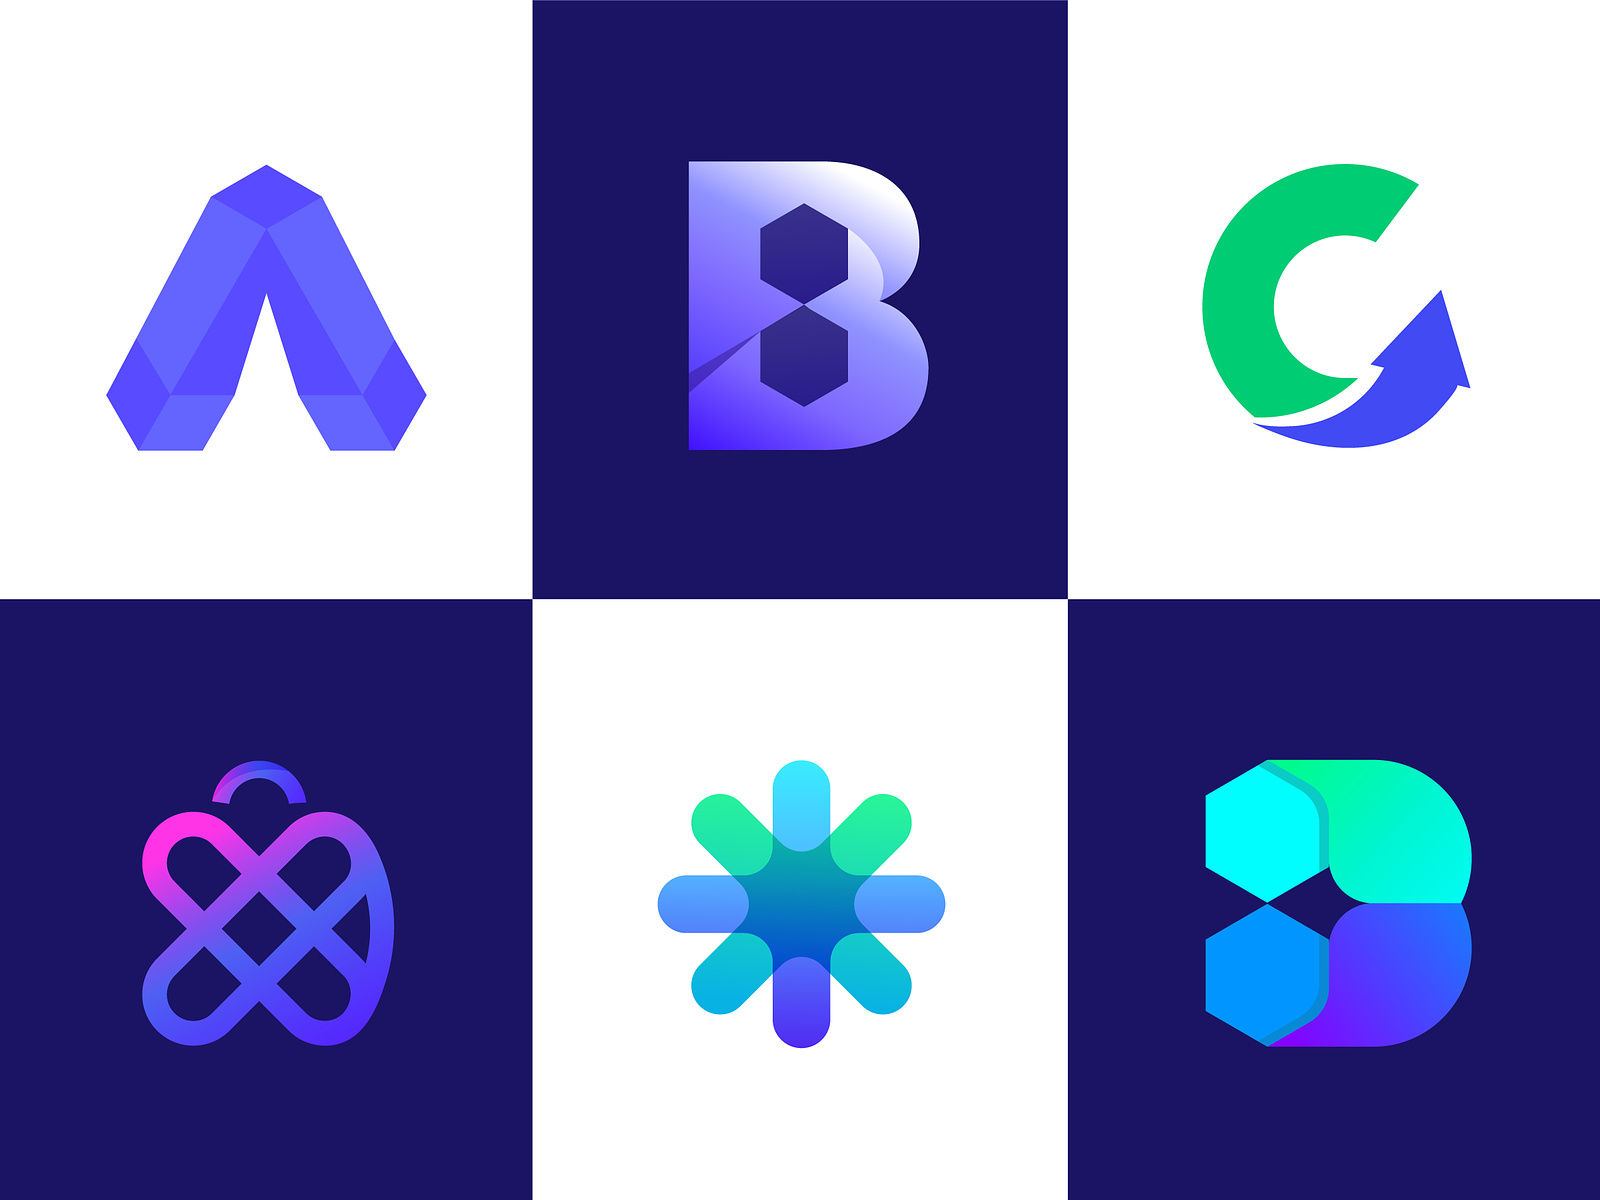 Logo Design Collection 2023 Vol.1 by Md Iqbal Hossain on Dribbble